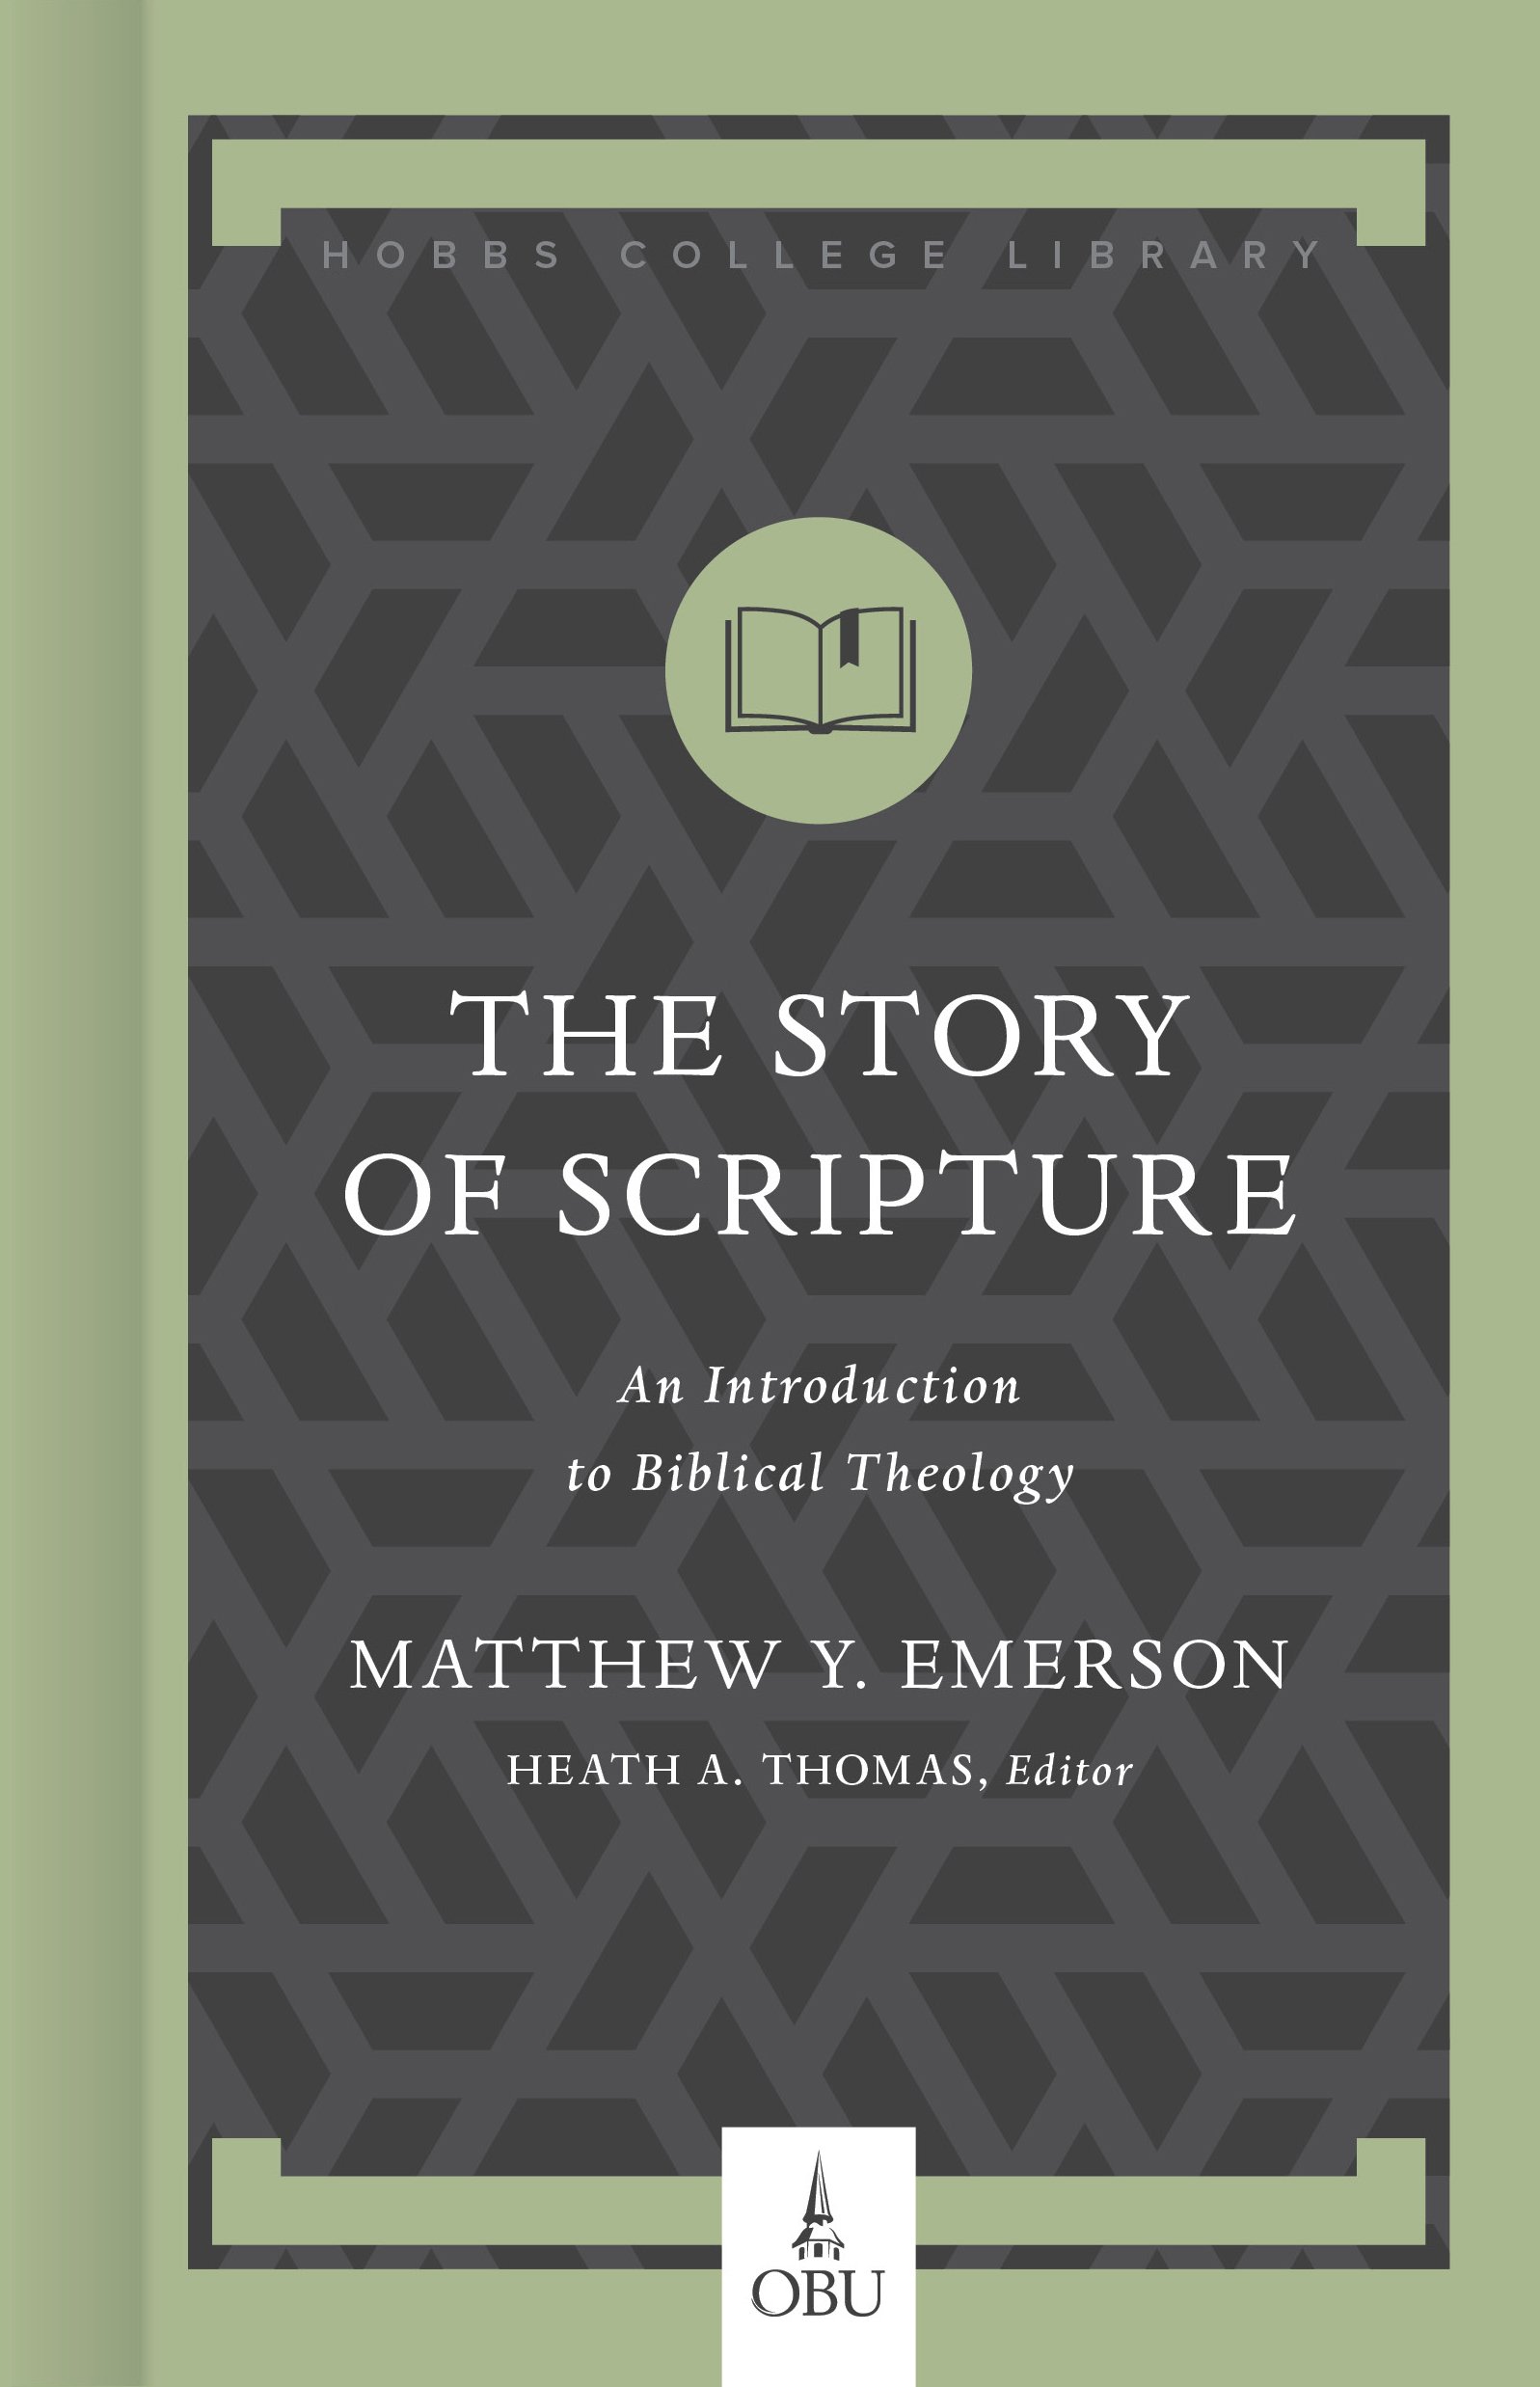 Book Notice: THE STORY OF SCRIPTURE: AN INTRODUCTION TO BIBLICAL THEOLOGY, by Matthew Y. Emerson